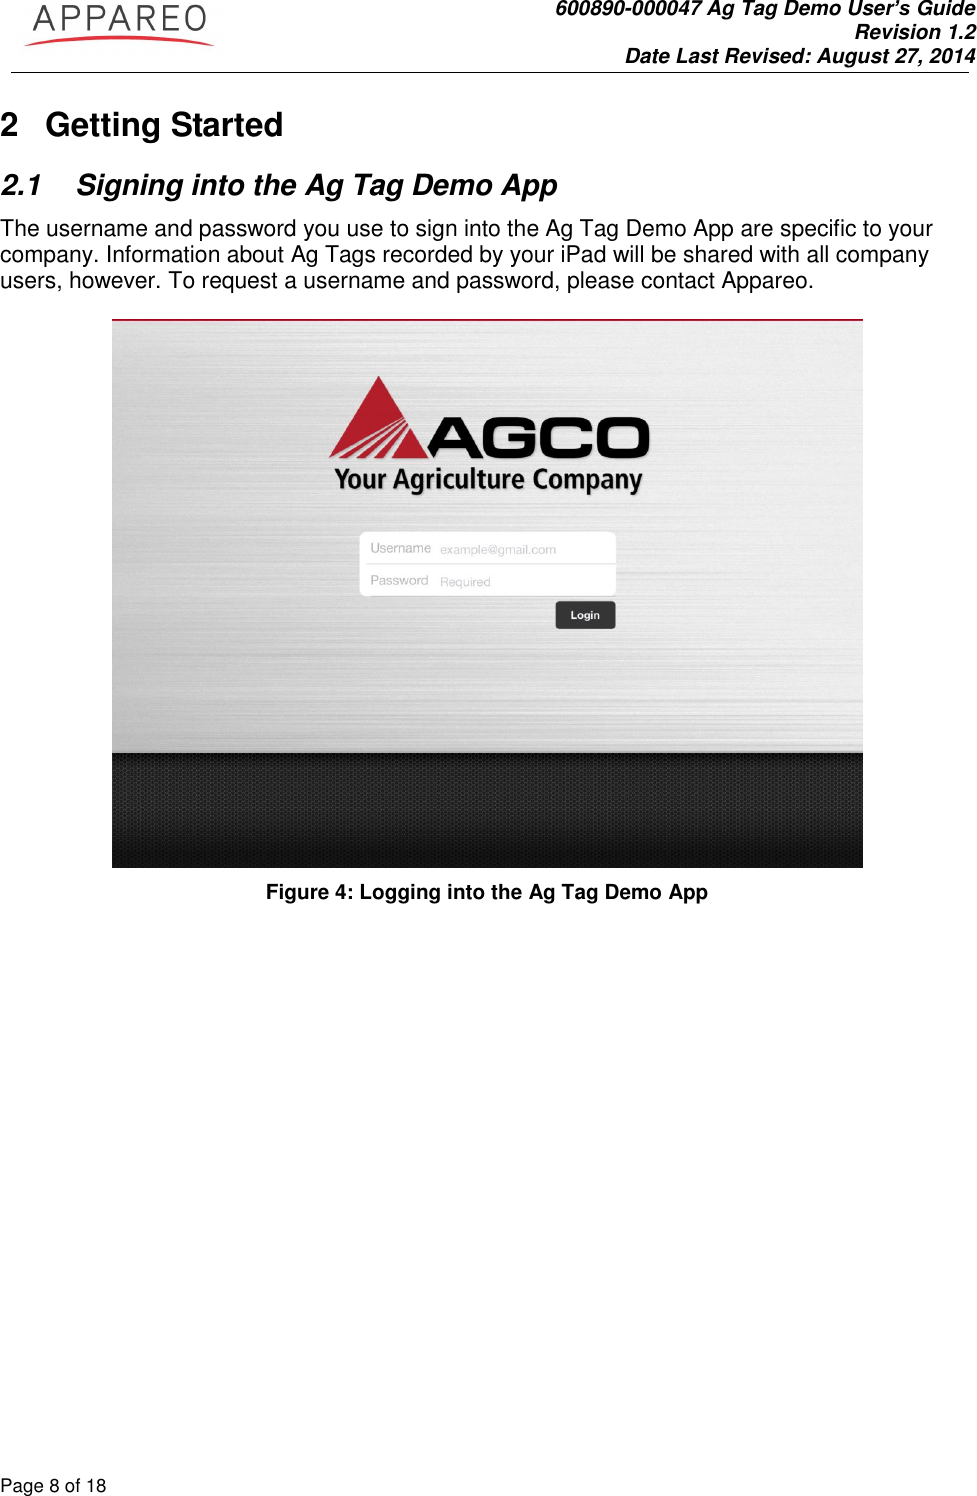               600890-000047 Ag Tag Demo User’s Guide   Revision 1.2 Date Last Revised: August 27, 2014 Page 8 of 18       2  Getting Started 2.1  Signing into the Ag Tag Demo App The username and password you use to sign into the Ag Tag Demo App are specific to your company. Information about Ag Tags recorded by your iPad will be shared with all company users, however. To request a username and password, please contact Appareo.     Figure 4: Logging into the Ag Tag Demo App 